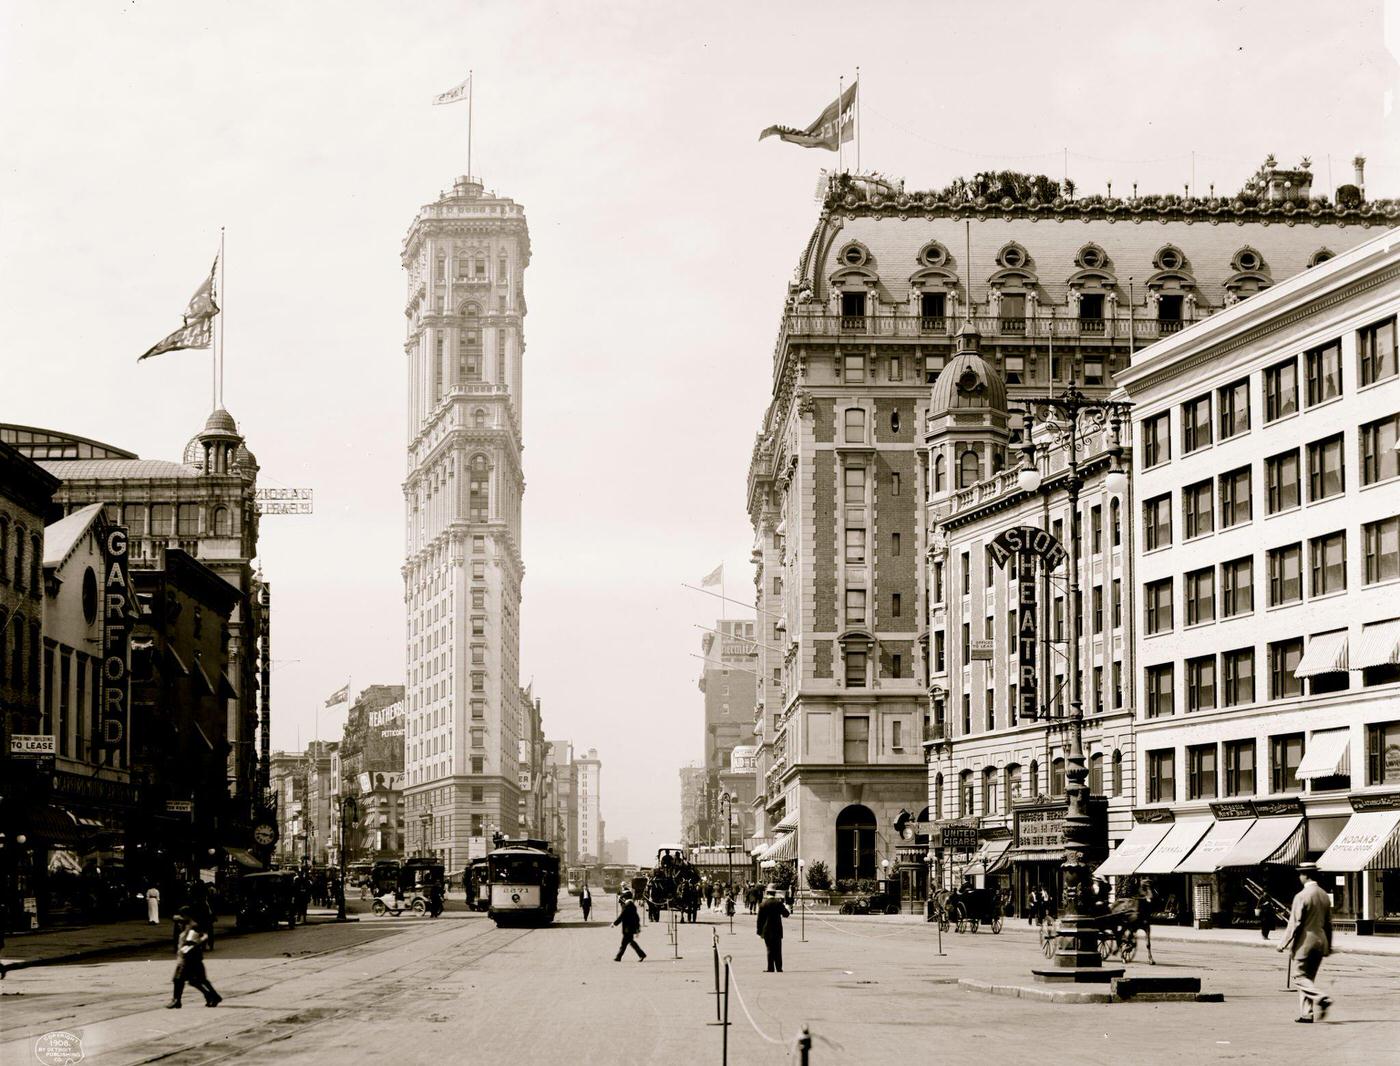 Longacre Square, Now Named Times Square, Theaters, Shops, Hotels